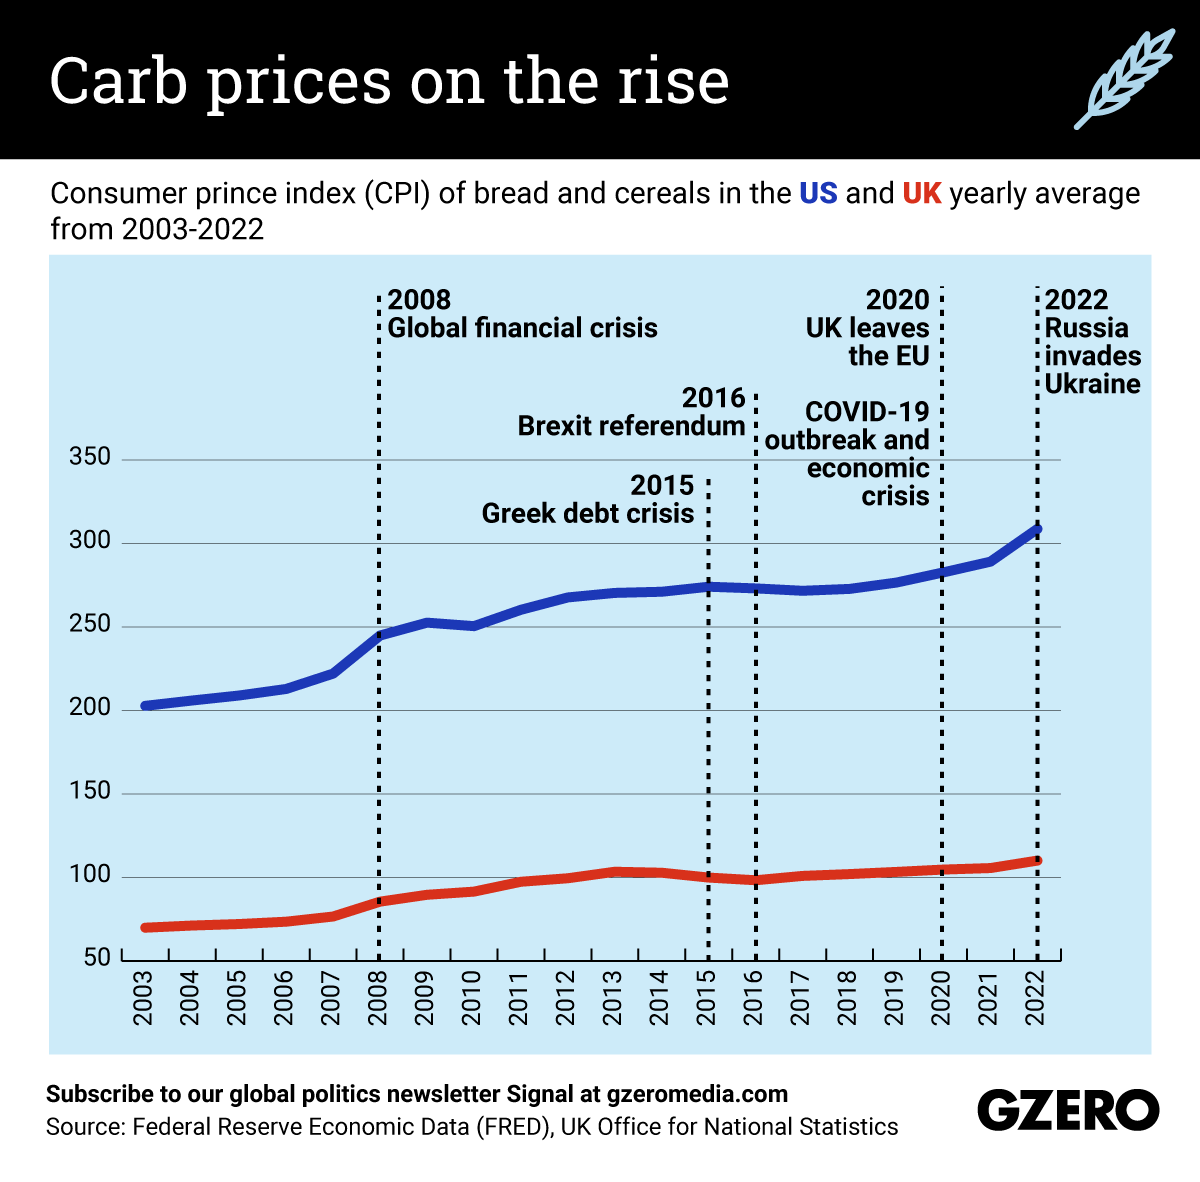 The Graphic Truth: Carb prices on the rise